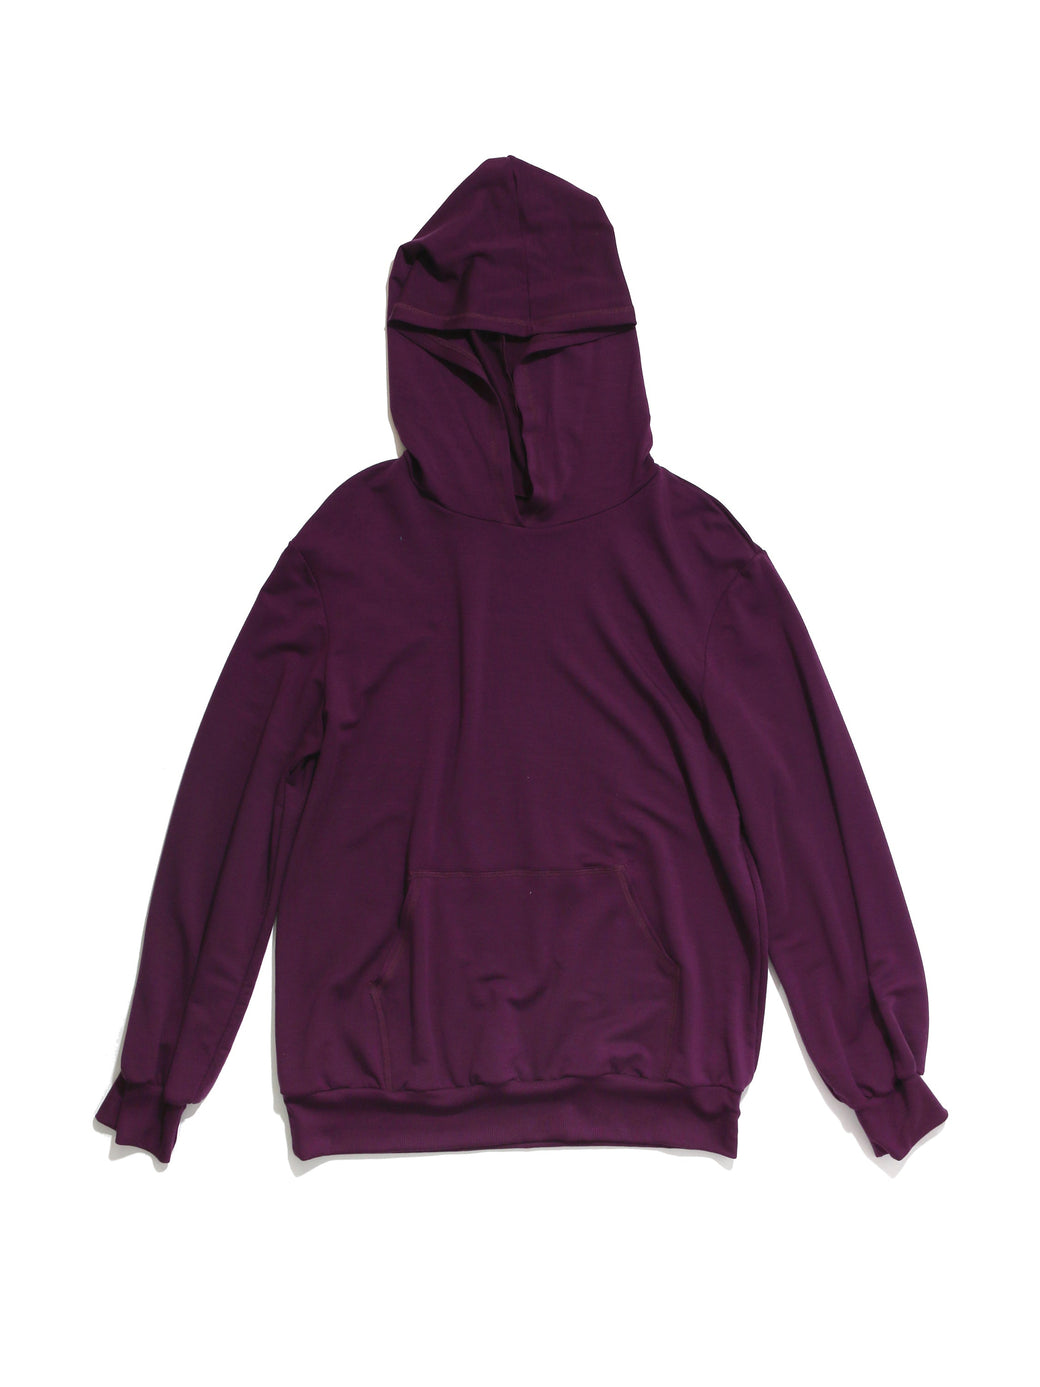 French Terry Hoodie Dried Cherry Red Sale